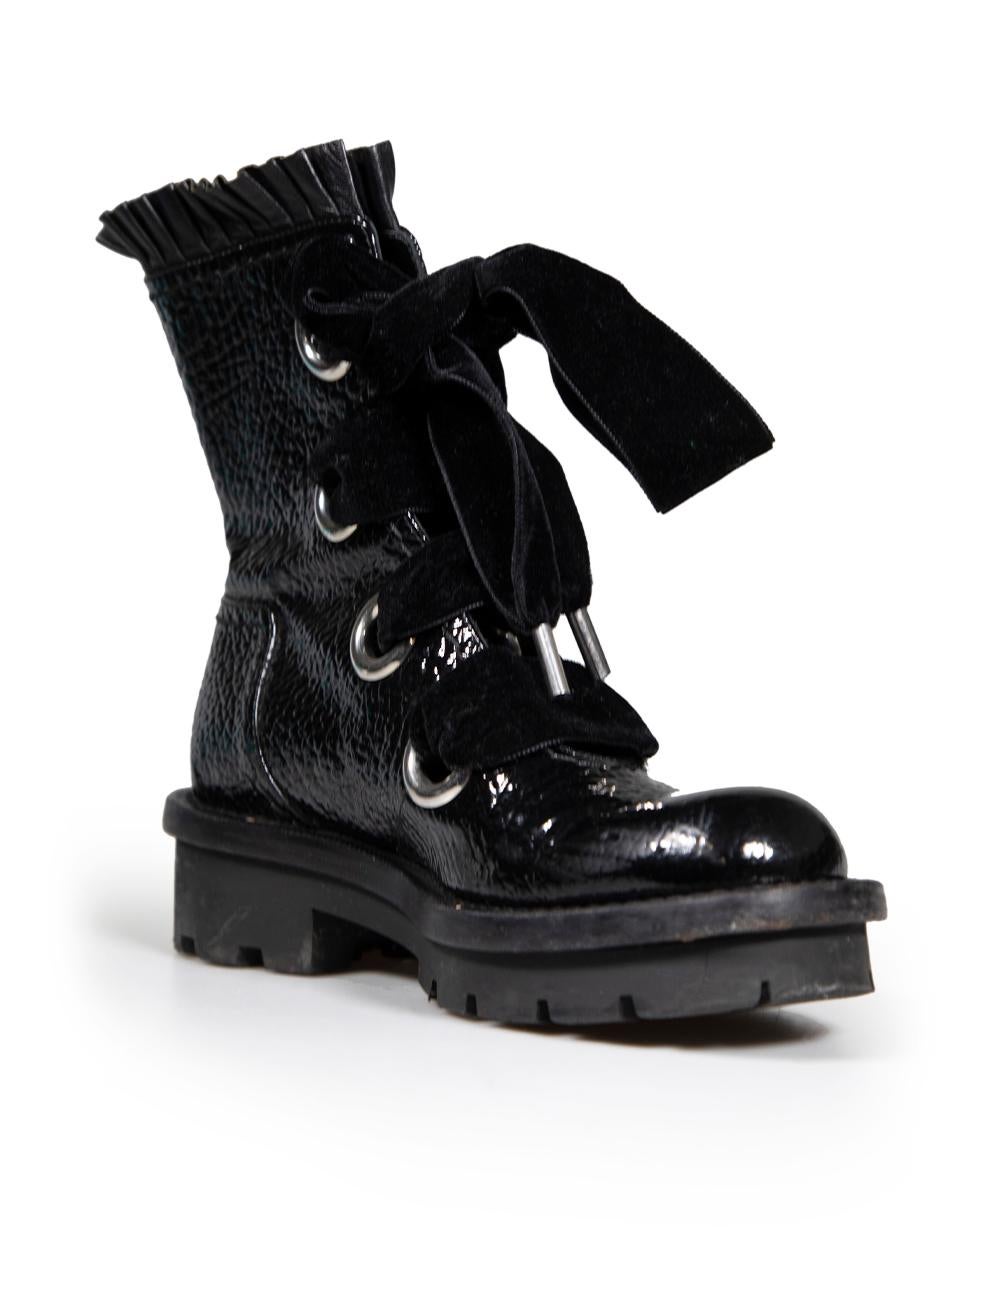 CONDITION is Very good. Minimal wear to boots is evident. Some small scratches and abrasions to the outsole and wear to the sole on this used Alexander McQueen designer resale item.
 
 Details
 Black
 Patent leather
 Combat boots
 Crinkle effect
